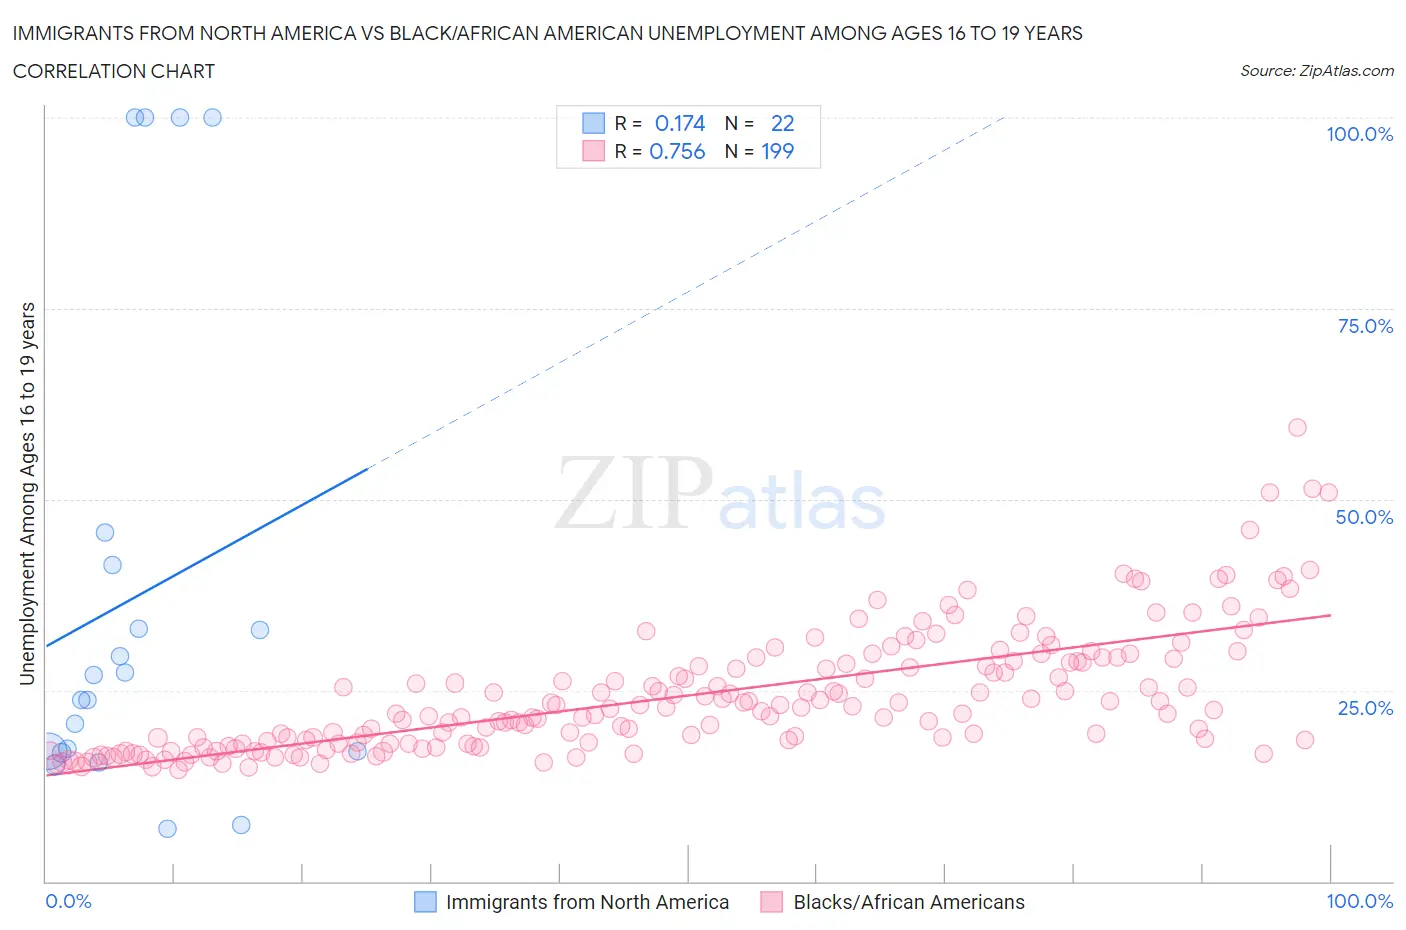 Immigrants from North America vs Black/African American Unemployment Among Ages 16 to 19 years